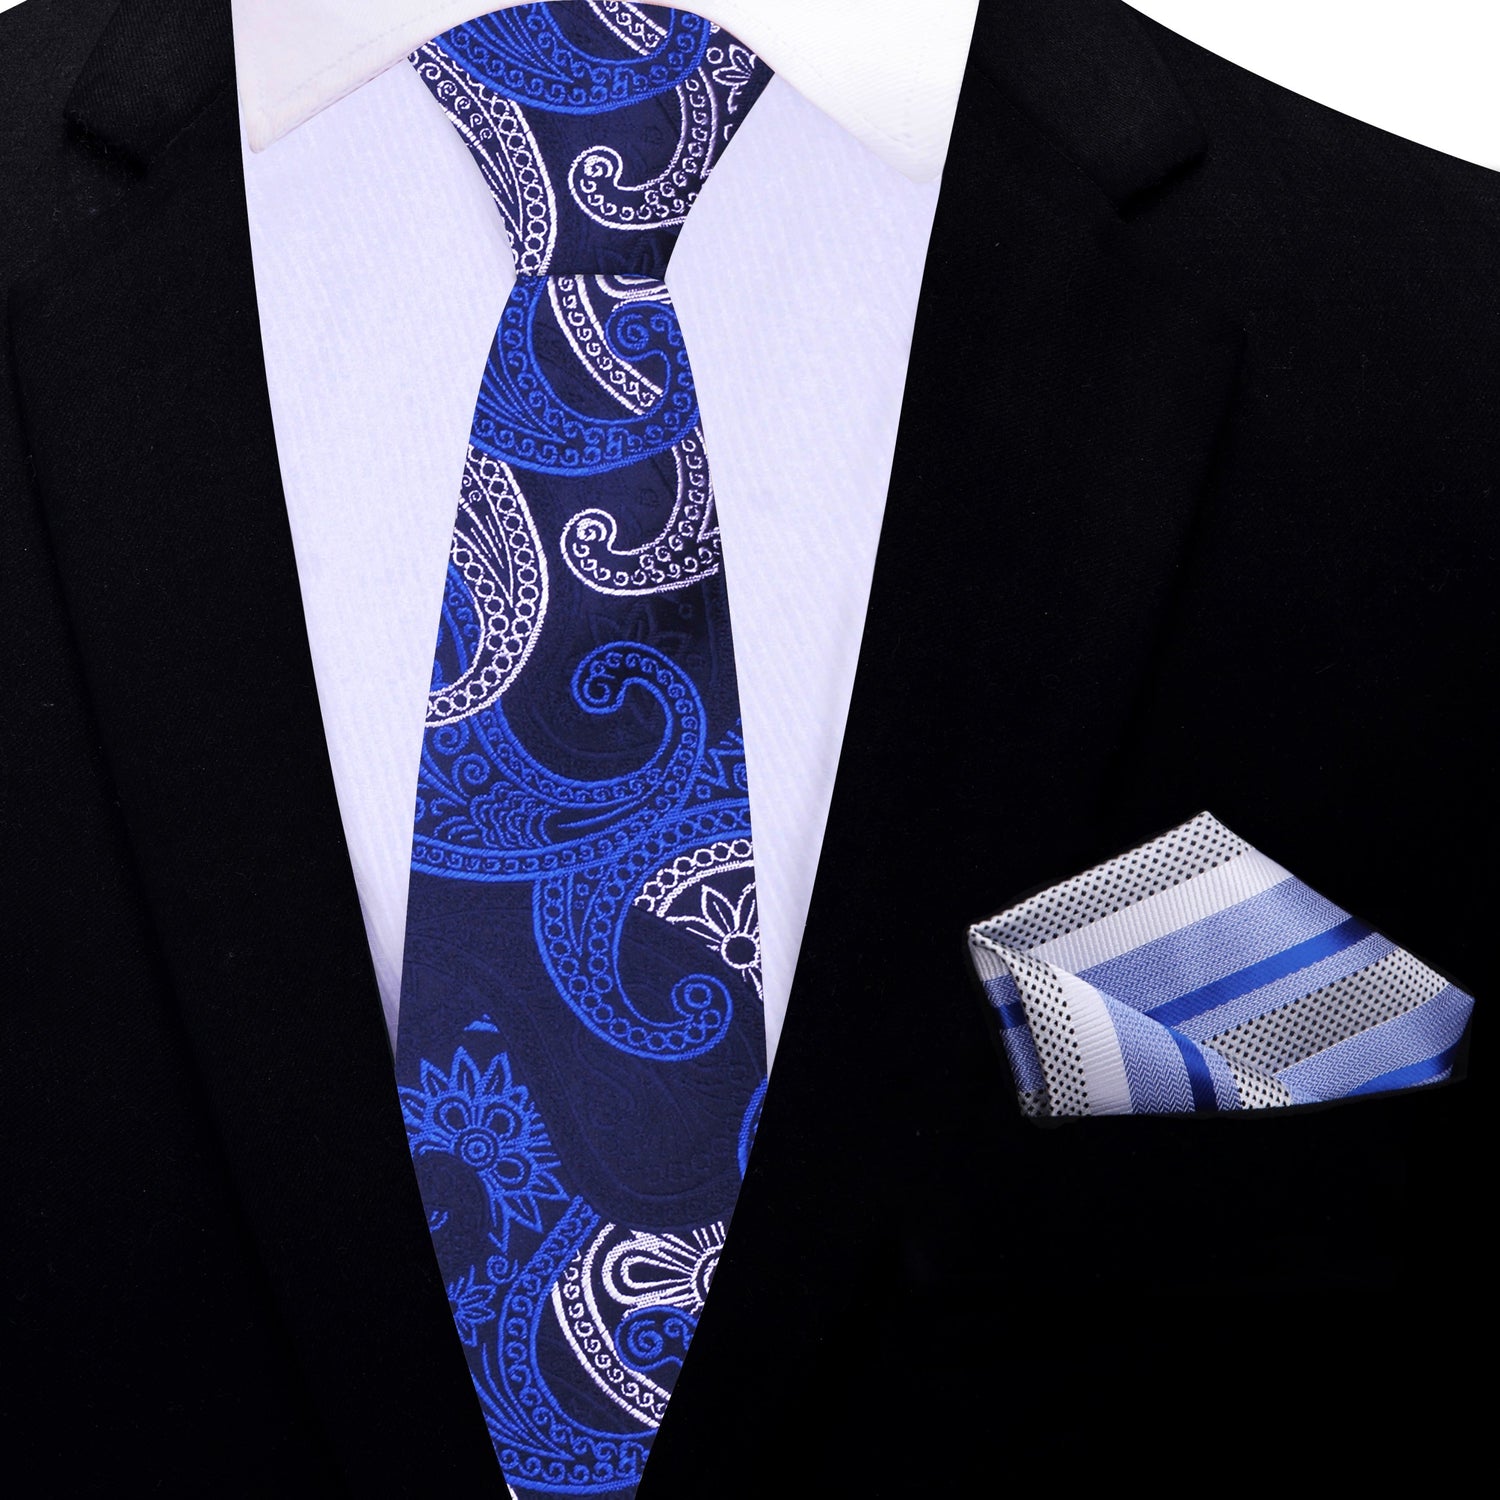 Thin Tie: Shades of Blue and White Paisley Necktie and White, Blue Stripe Square